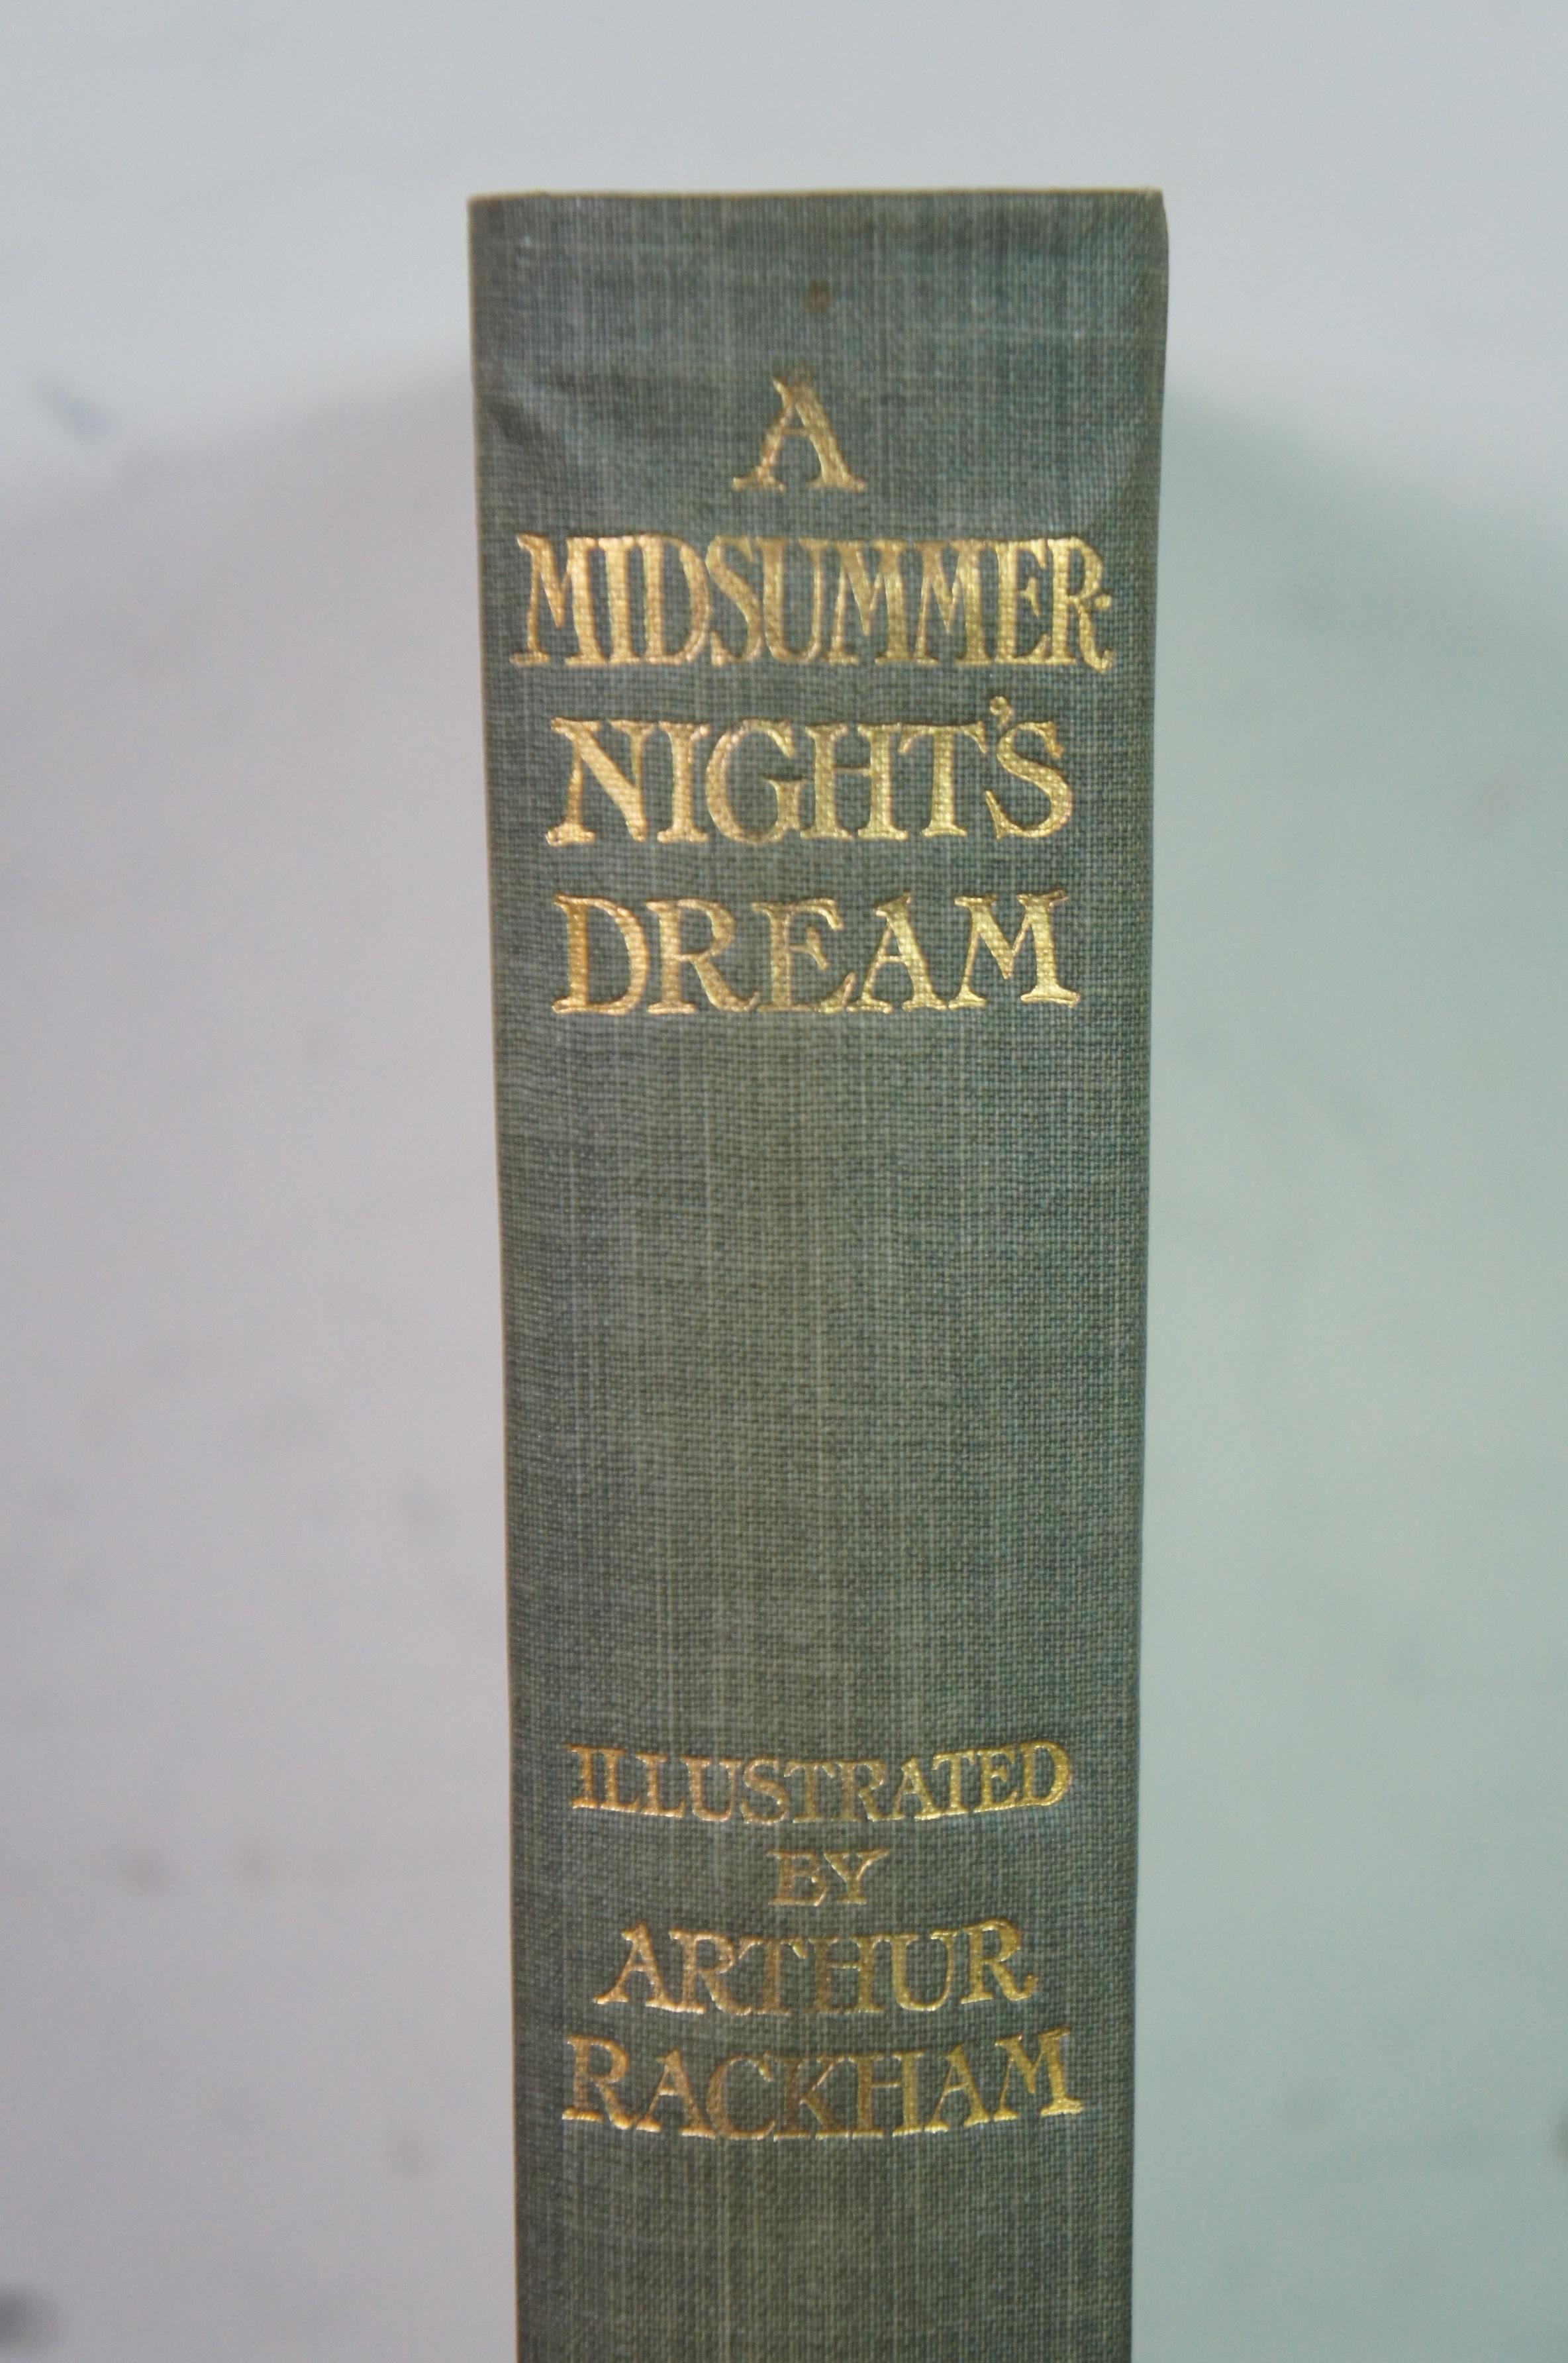 Midsummer-Night’s Dream Illustrations by Arthur Rackham 1908 Doubleday Page In Good Condition For Sale In Dayton, OH